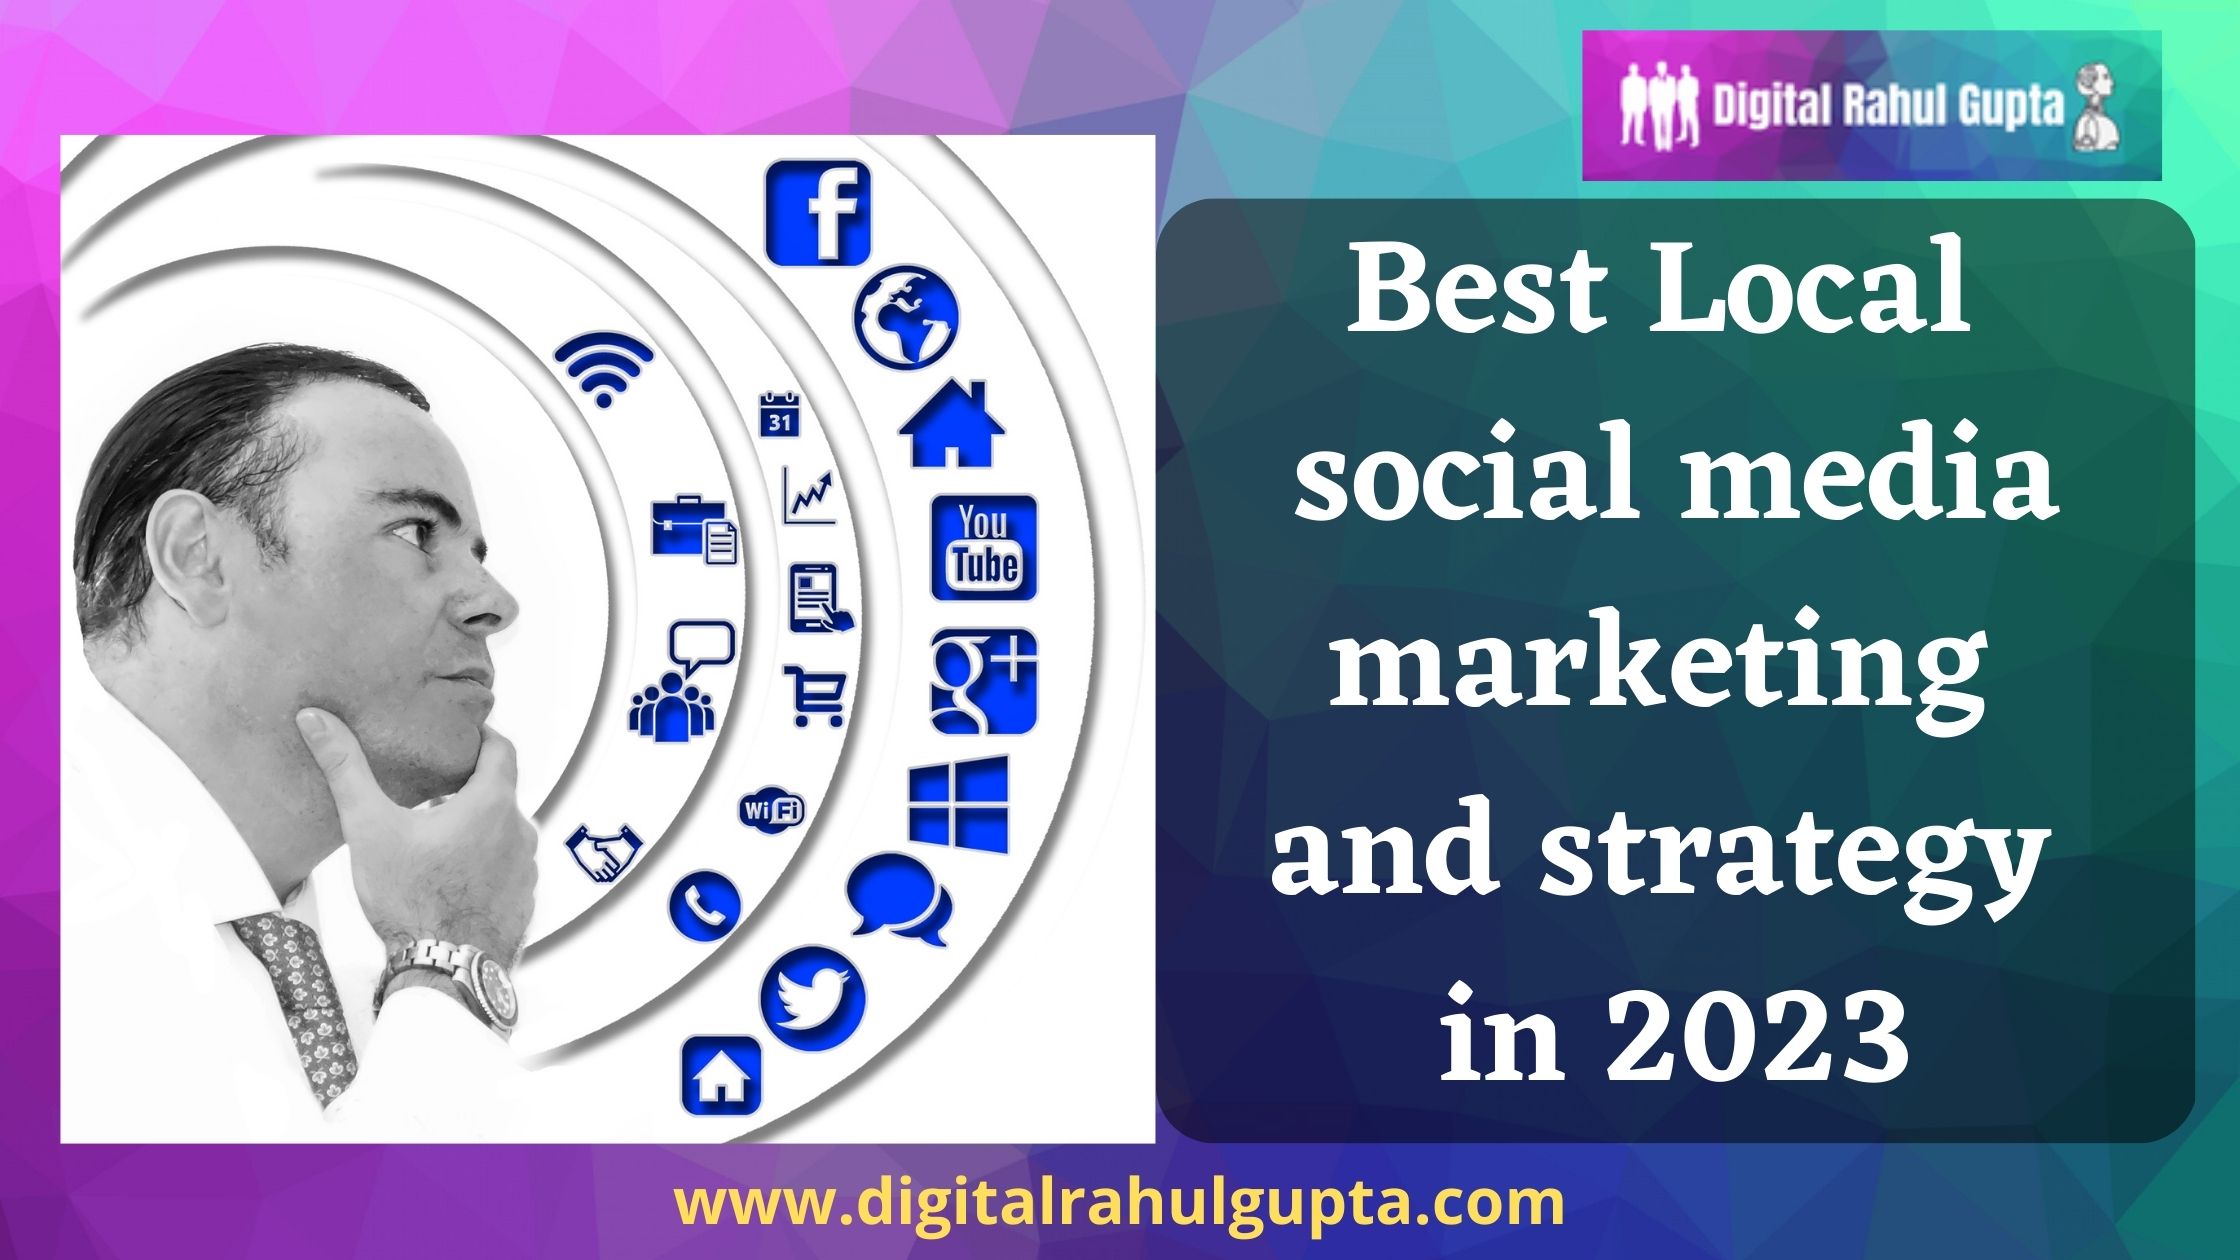 Best Local social media marketing and strategy in 2023